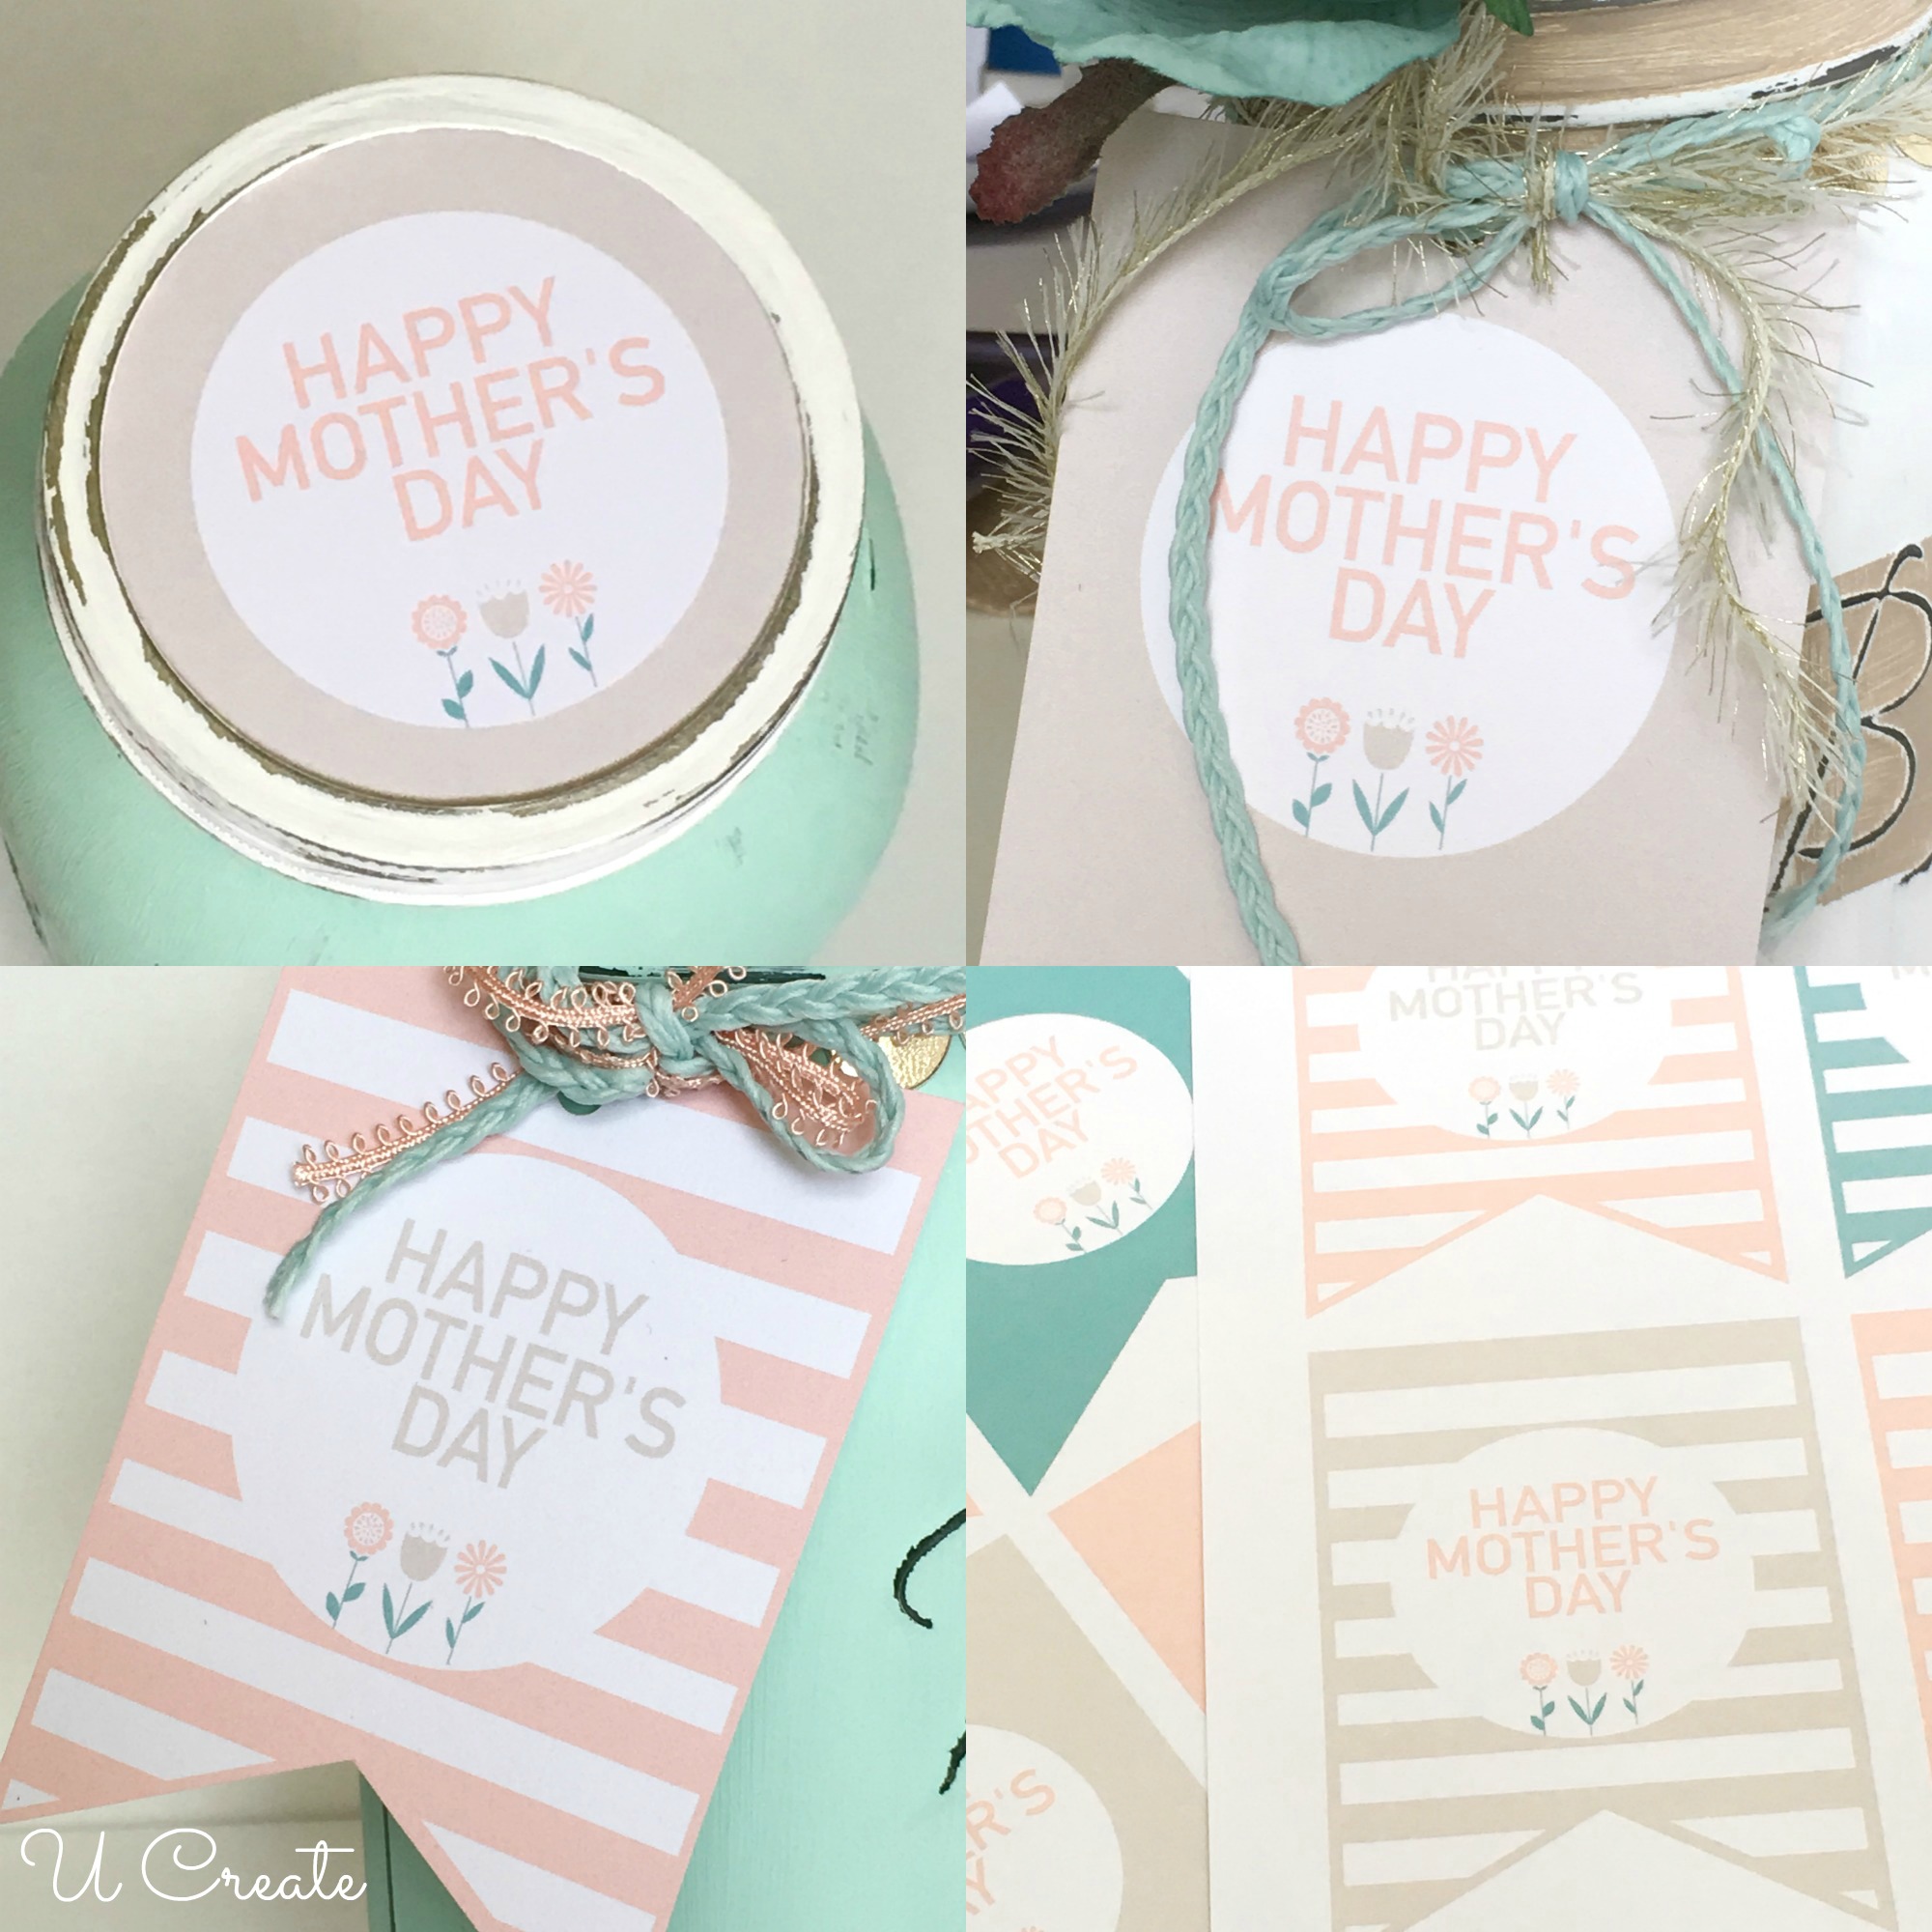 http://www.u-createcrafts.com/wp-content/uploads/2016/04/free-mothers-day-tags.jpg